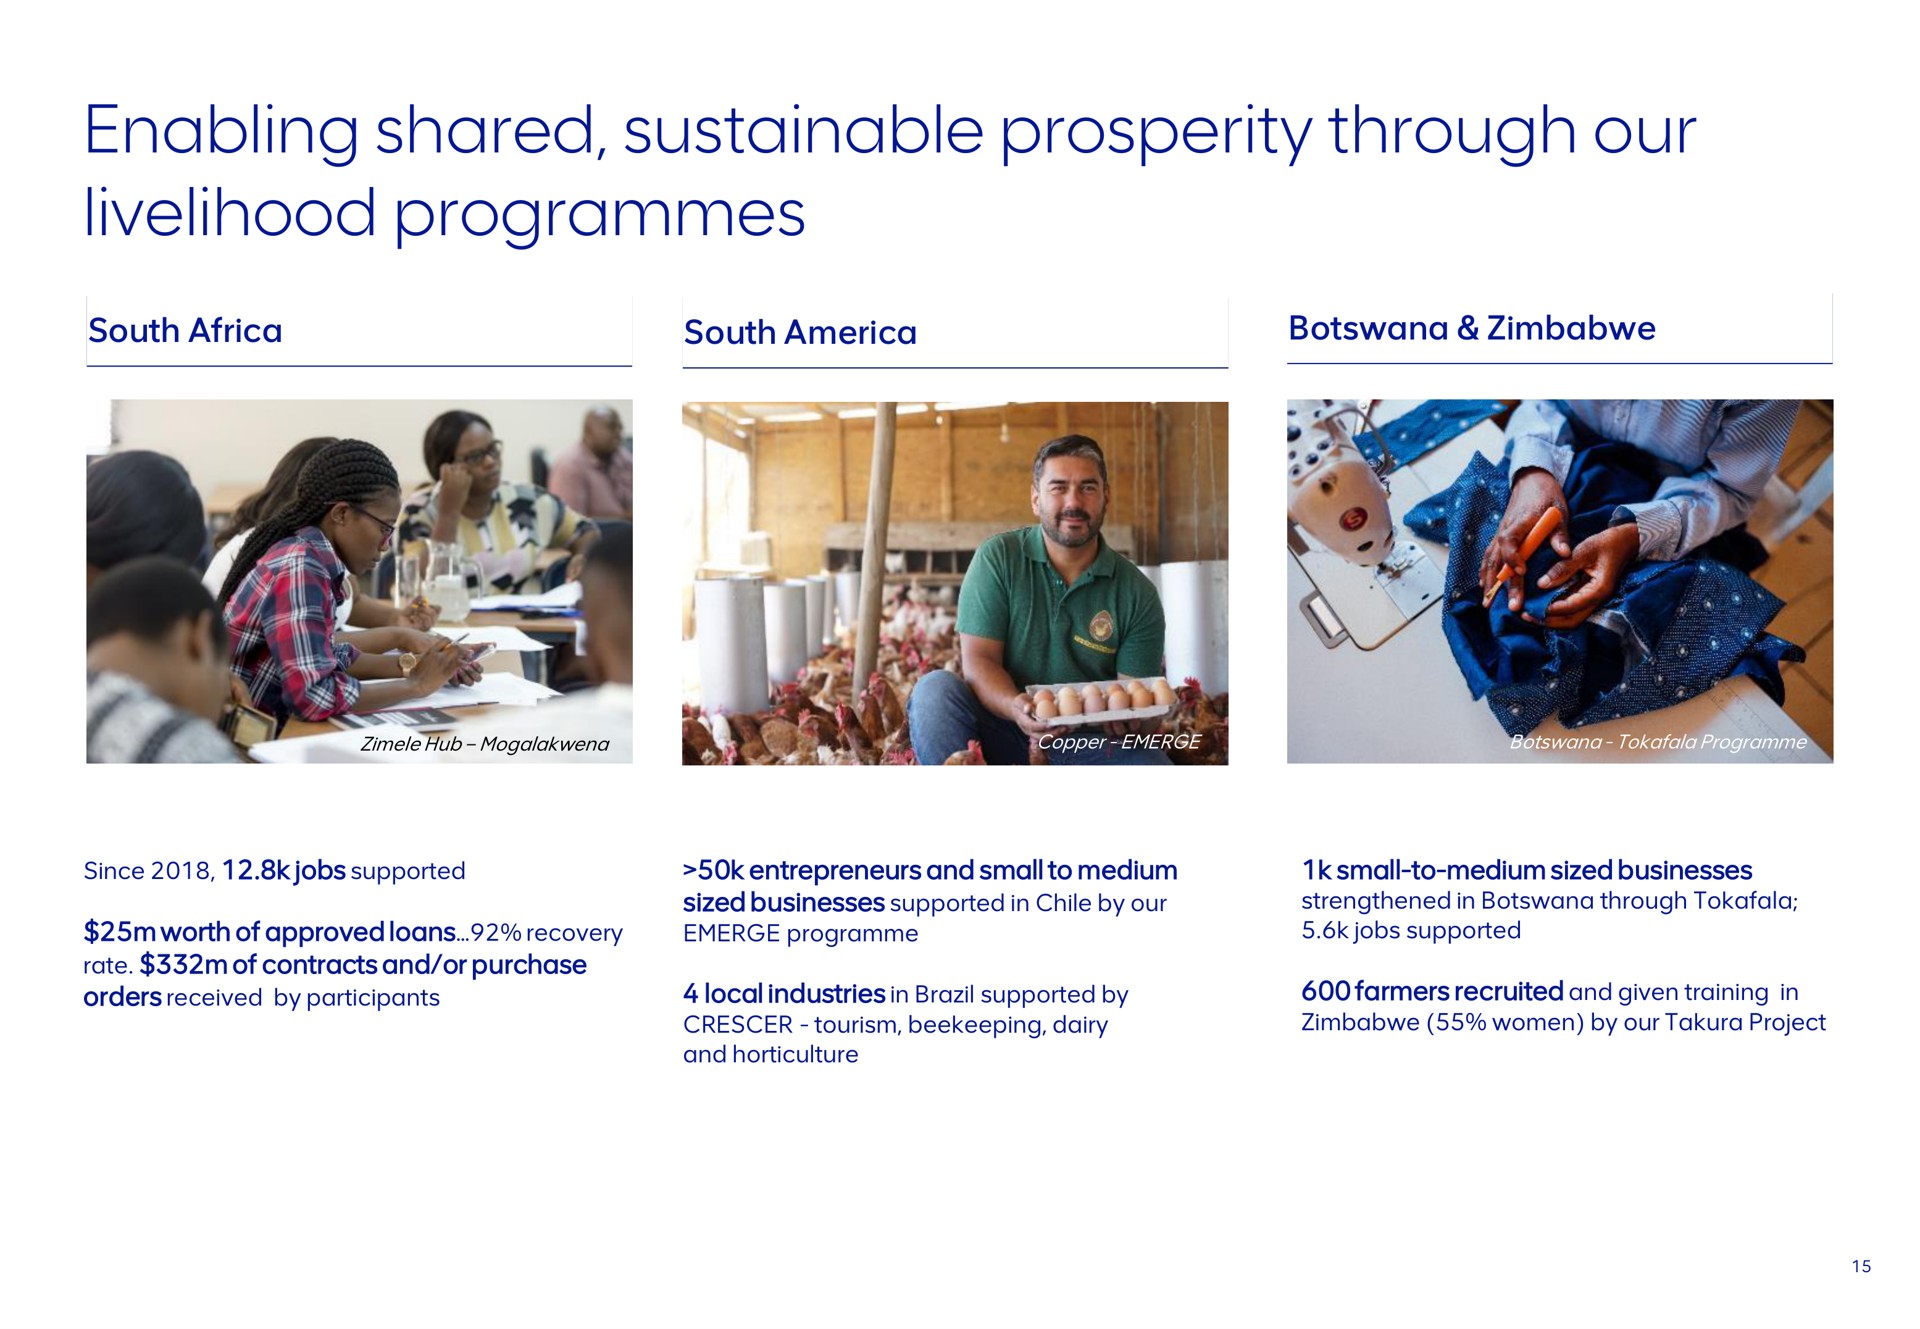 enabling shared sustainable prosperity through our livelihood programmes | AngloAmerican